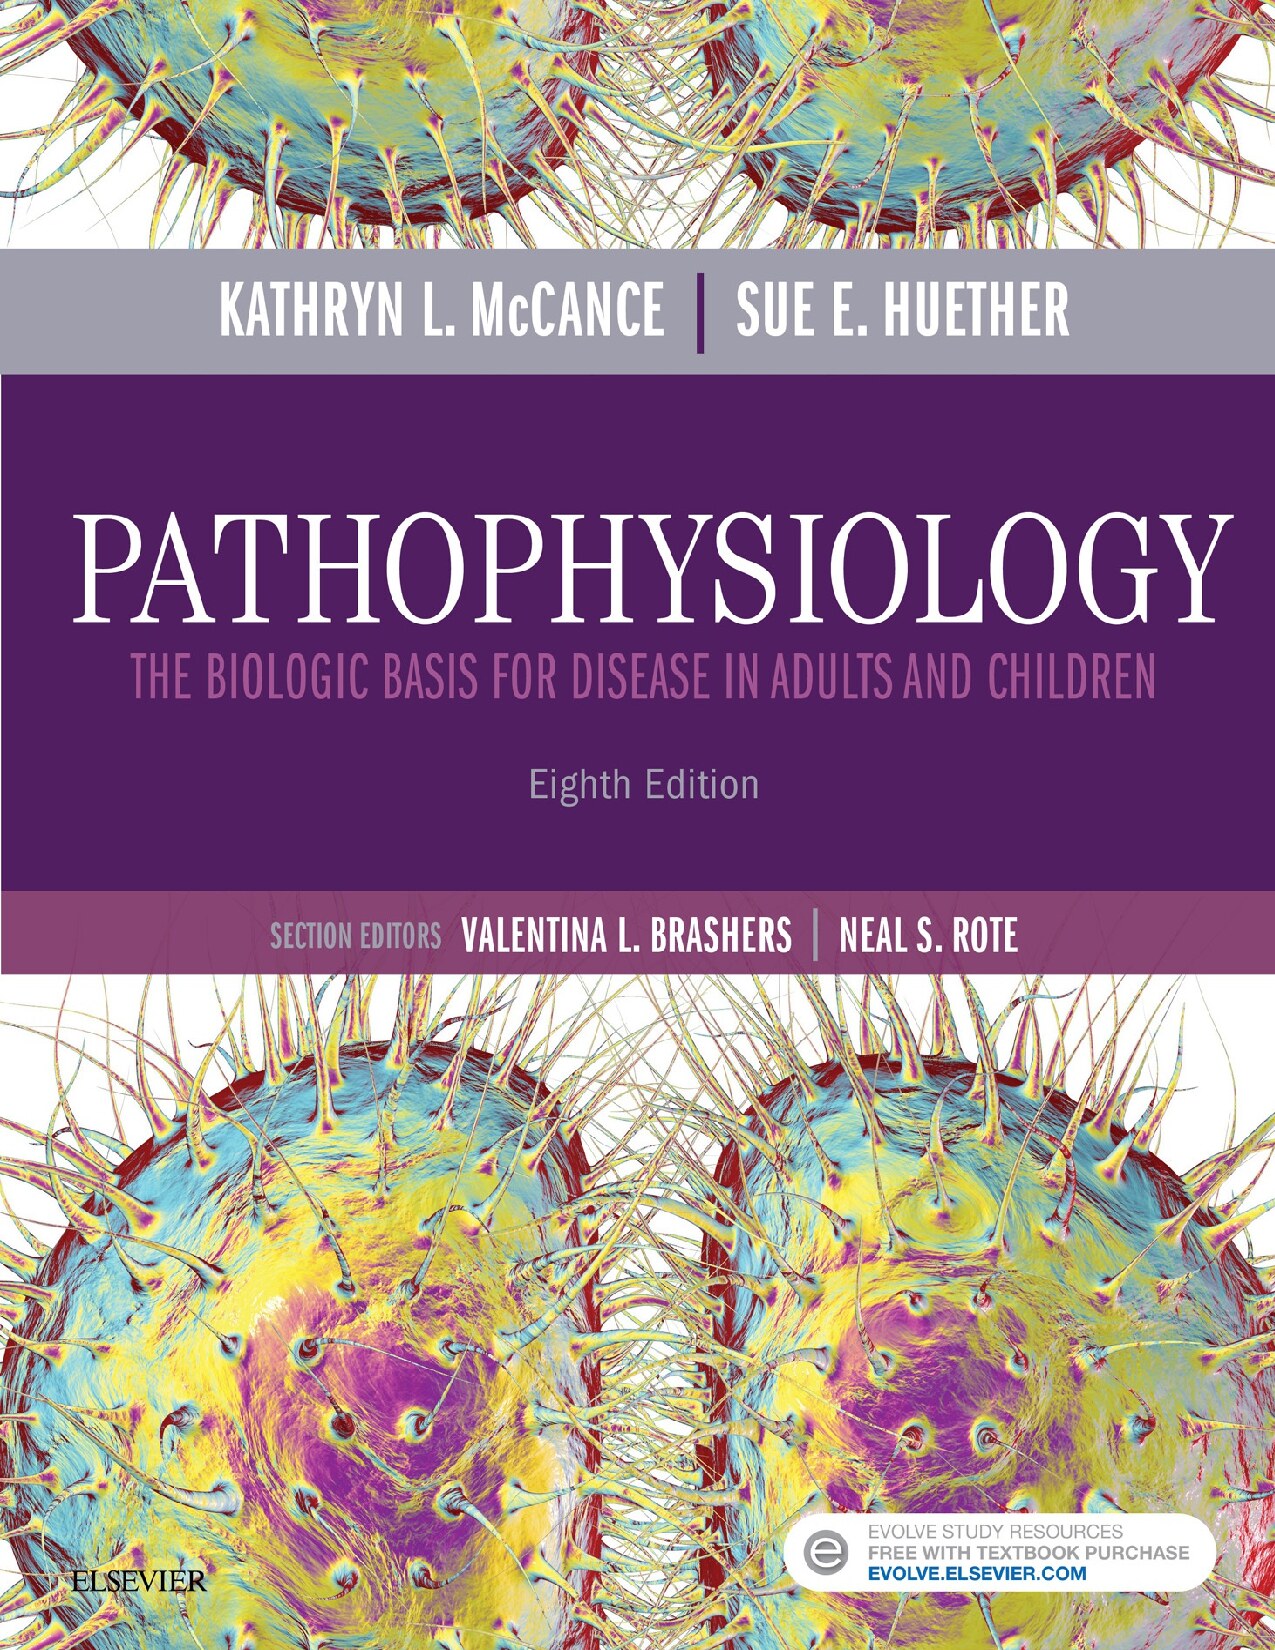 Pathophysiology the Biologic Basis for Disease in Adults and Children, Eigth Edition